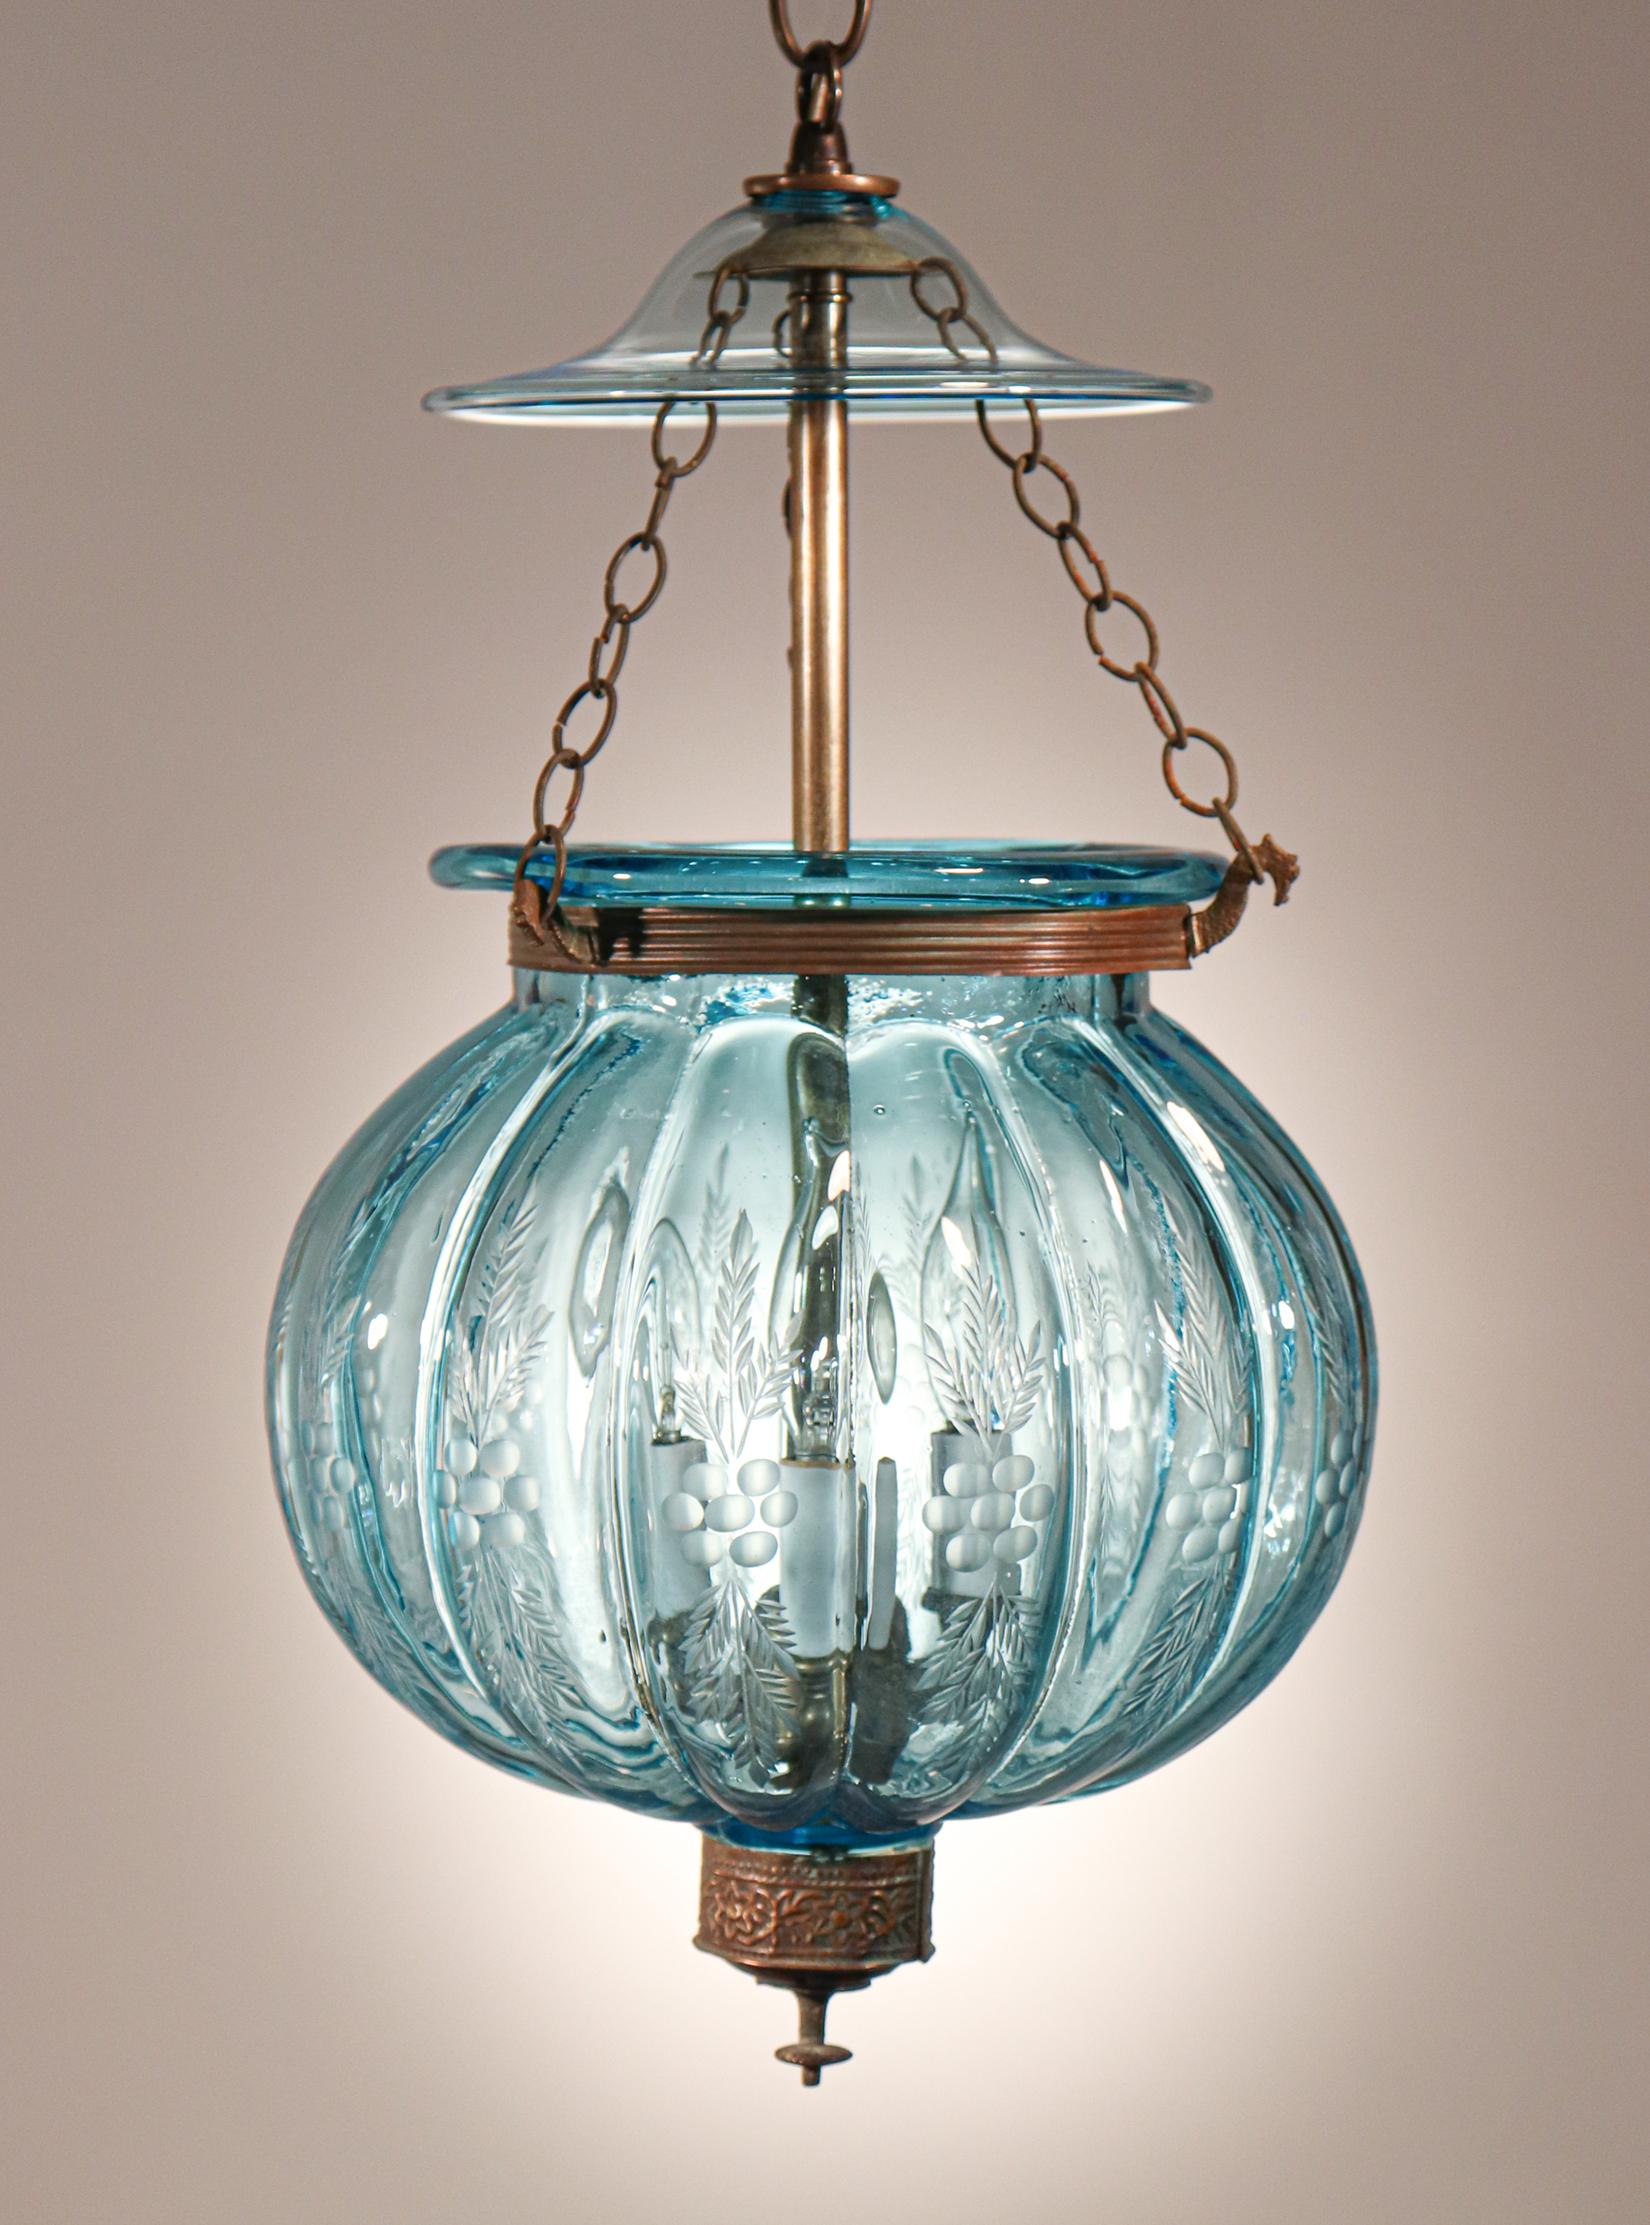 A rare antique Belgian melon bell jar lantern features excellent quality aqua-blue hand blown glass and a finely etched wheat motif. The lantern's brass finial/candle holder base, which is slightly canted is original to the lantern. The rolled brass